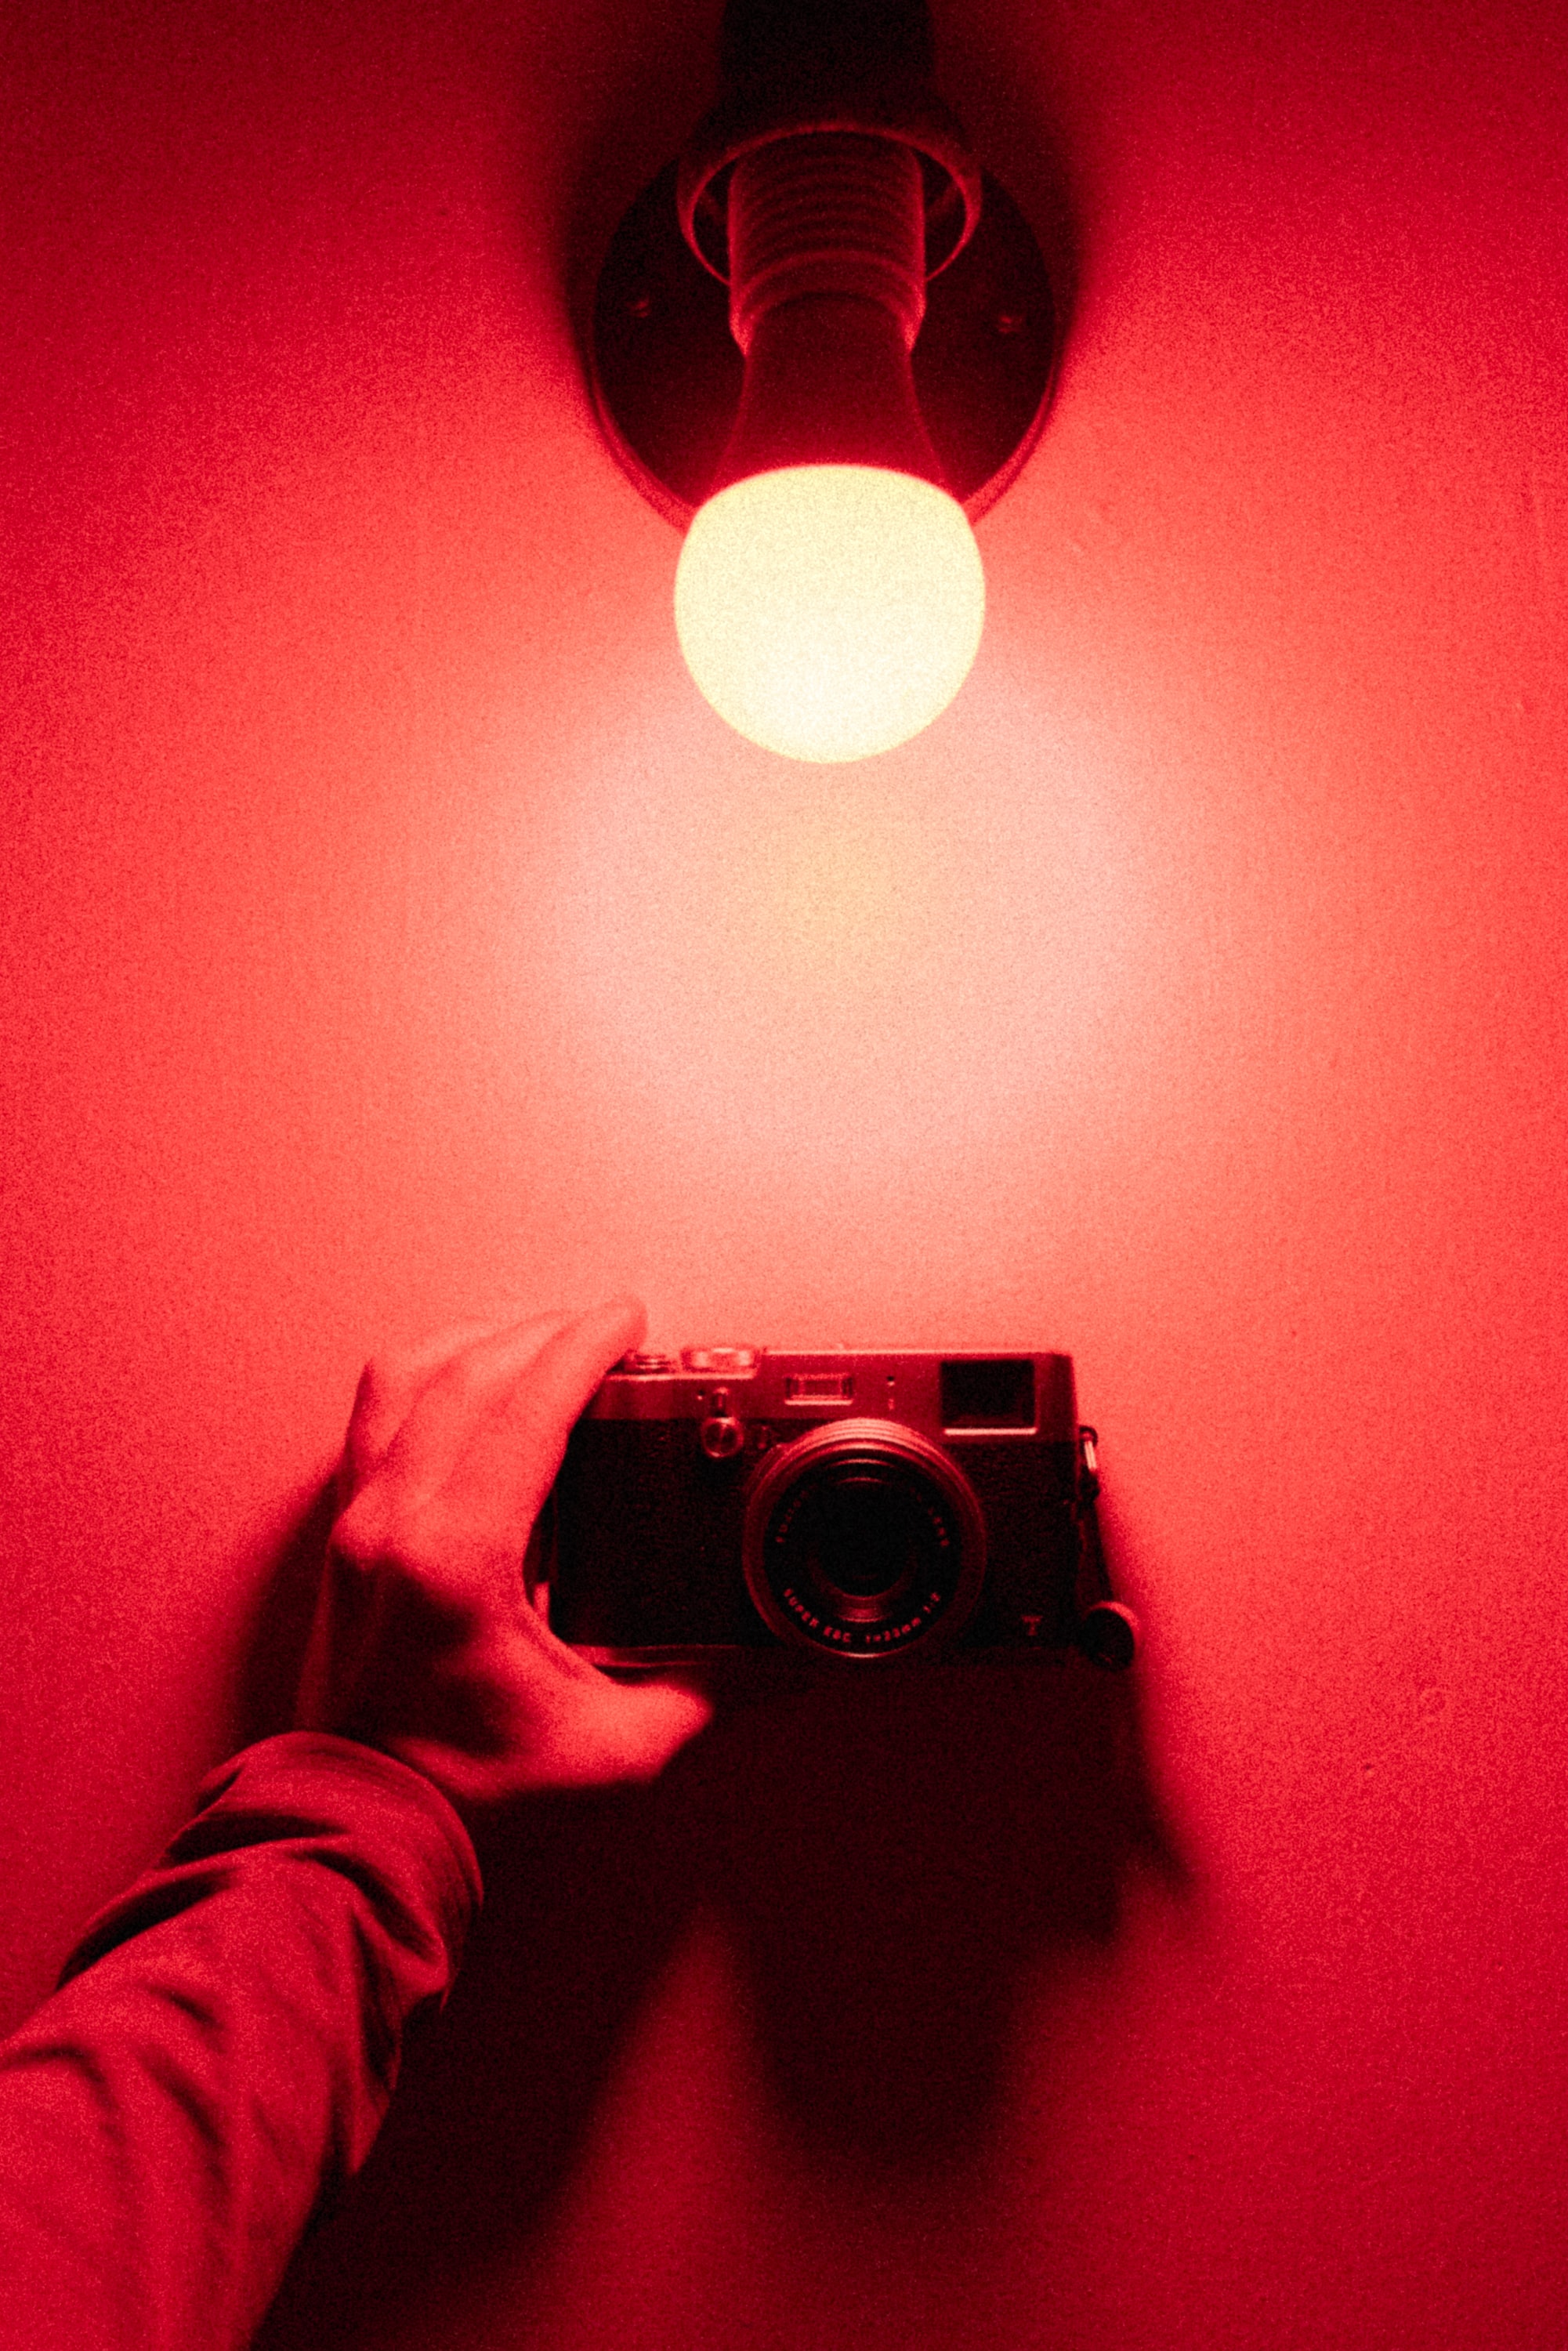 A person holding a camera in a red room - Light red